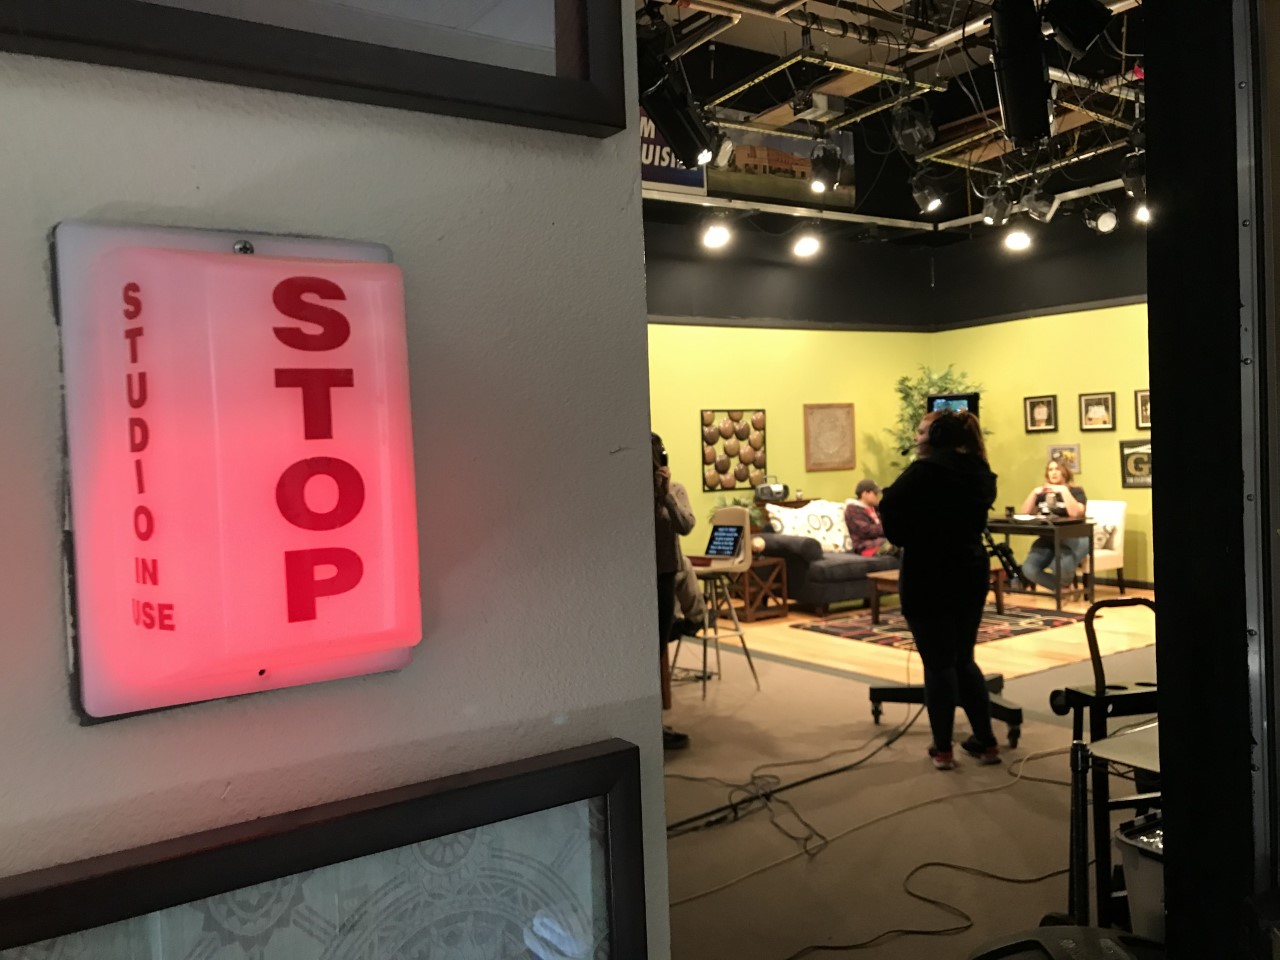 A red STOP light is on, indicating the studio in front is recording